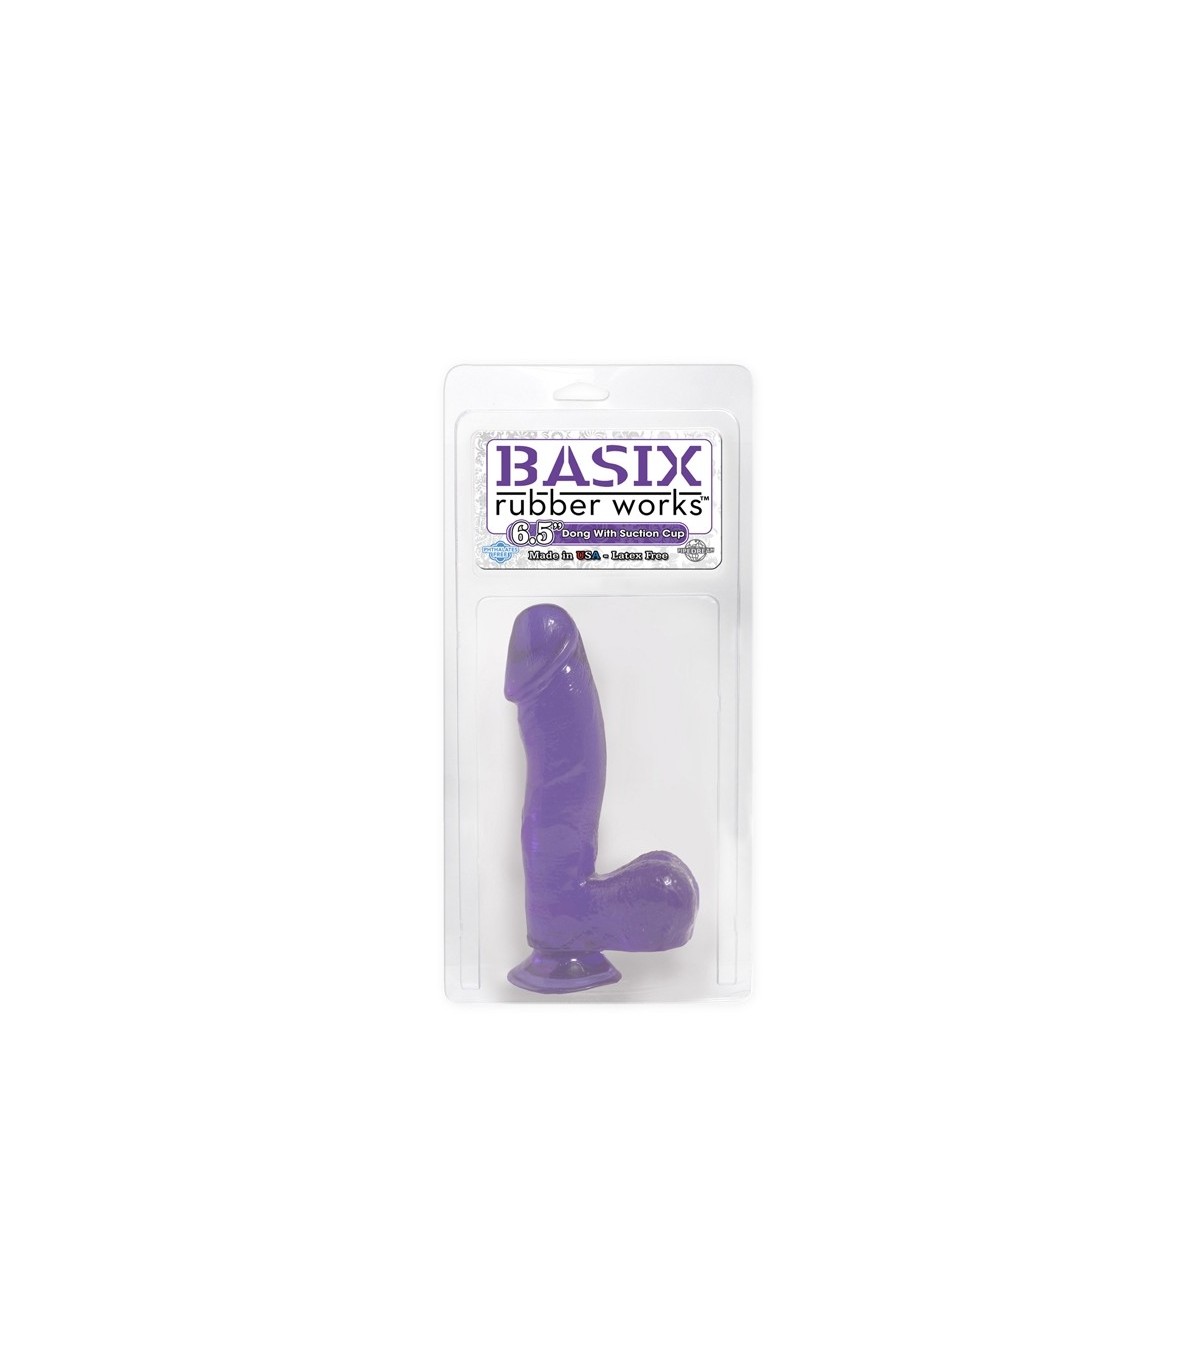 BASIX 6.5" DONG W SUCTION CUP PRPLE